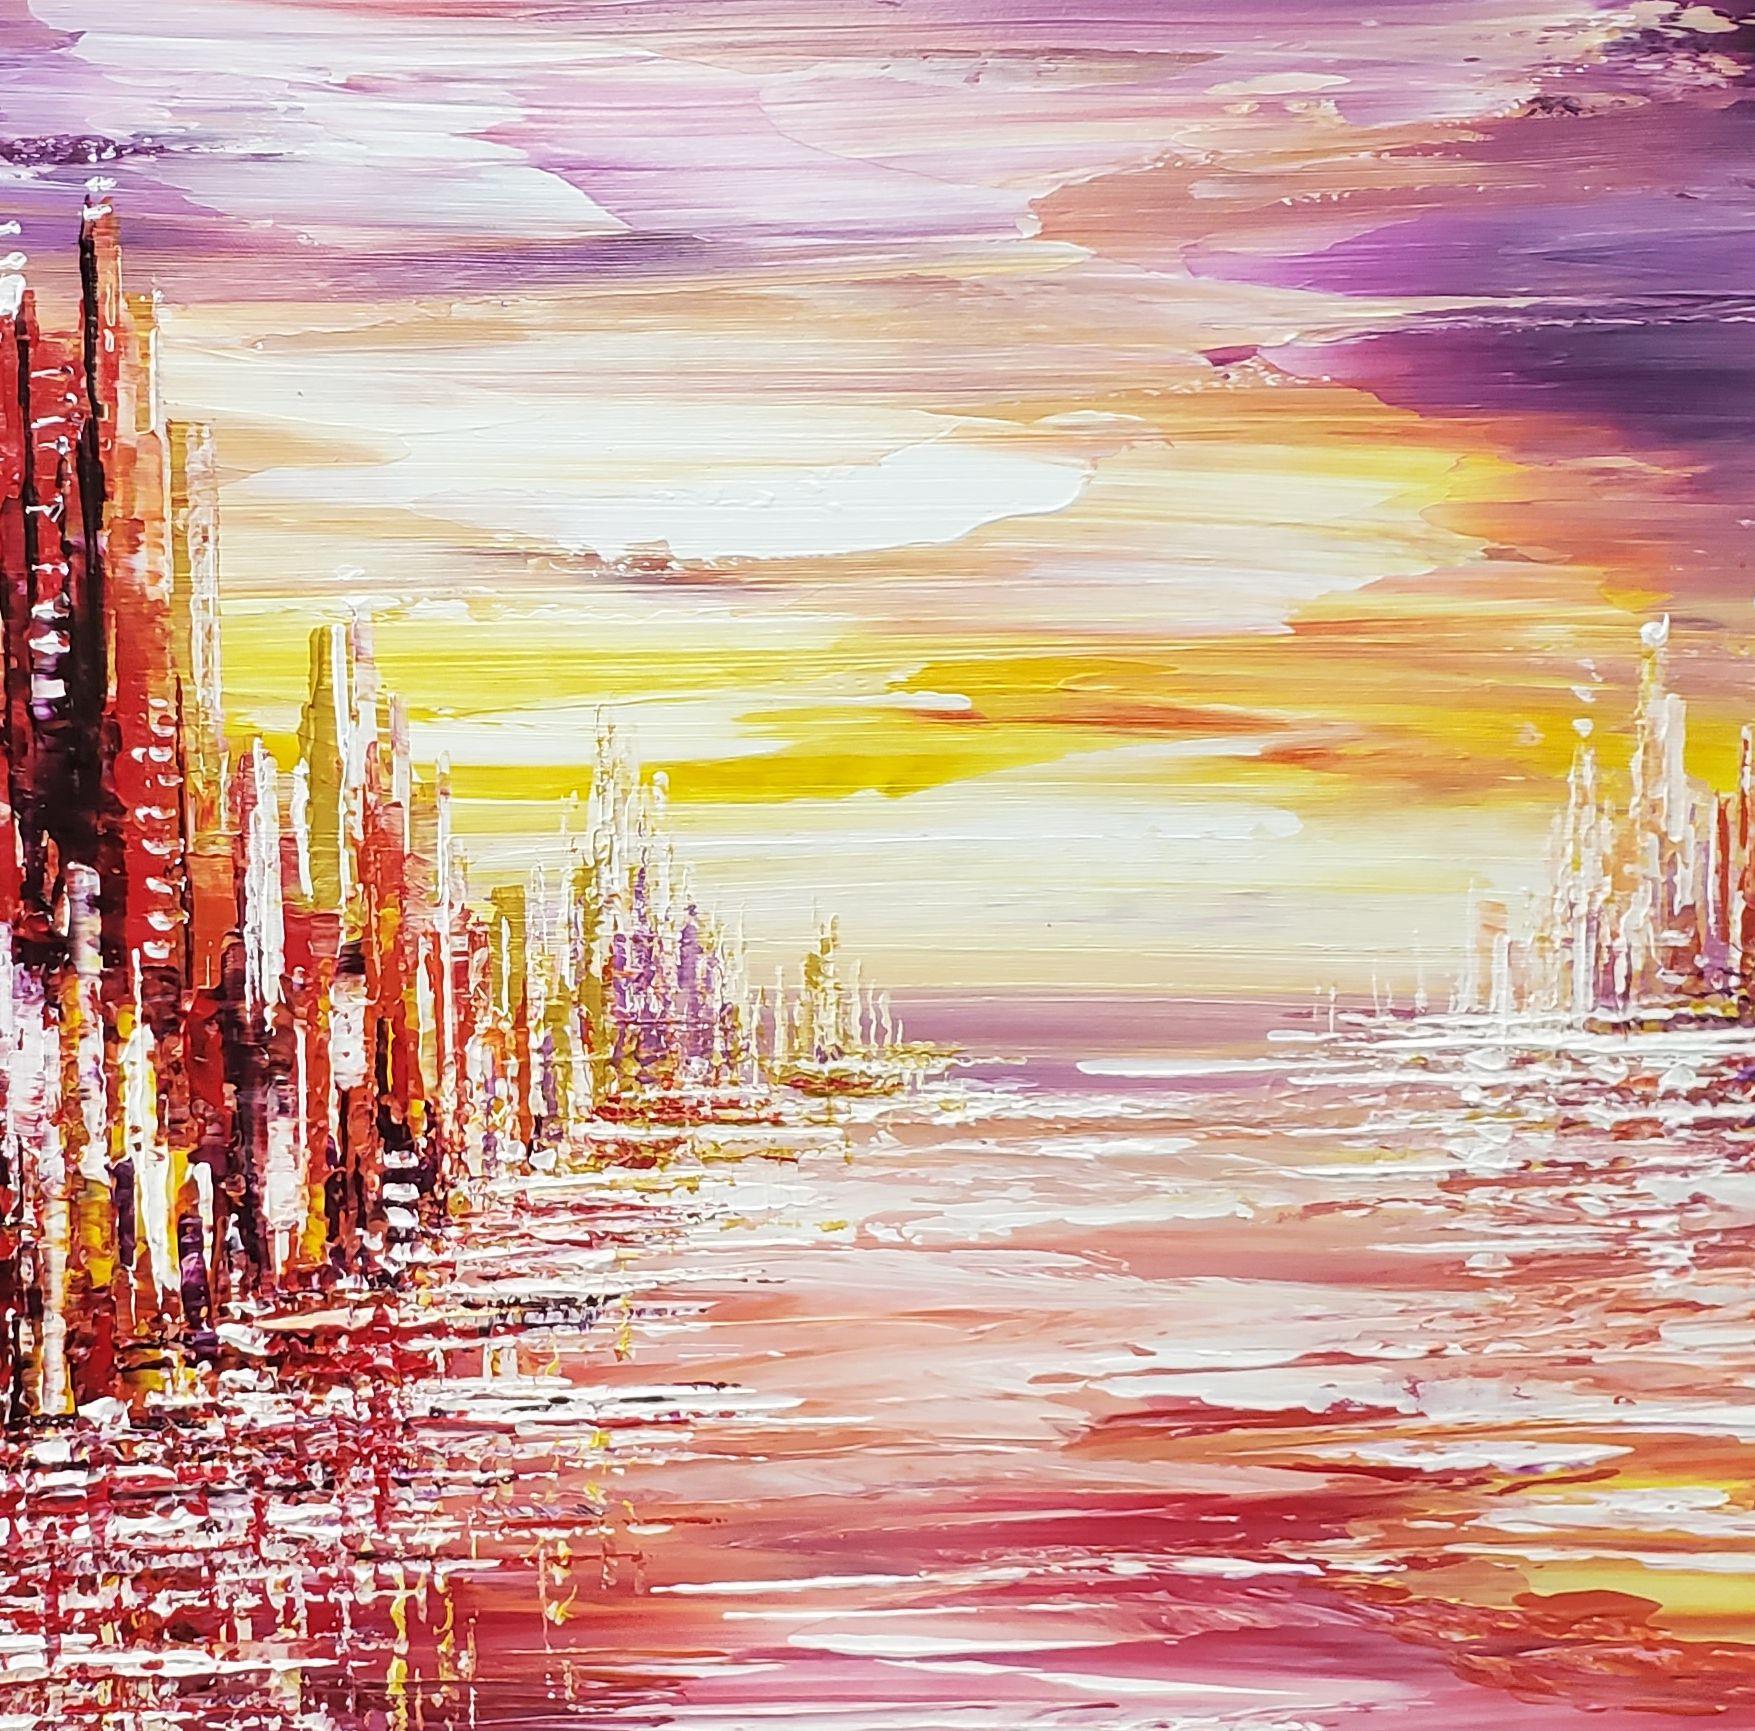 This is an original palette knife urban landscape painting.  Size: 24